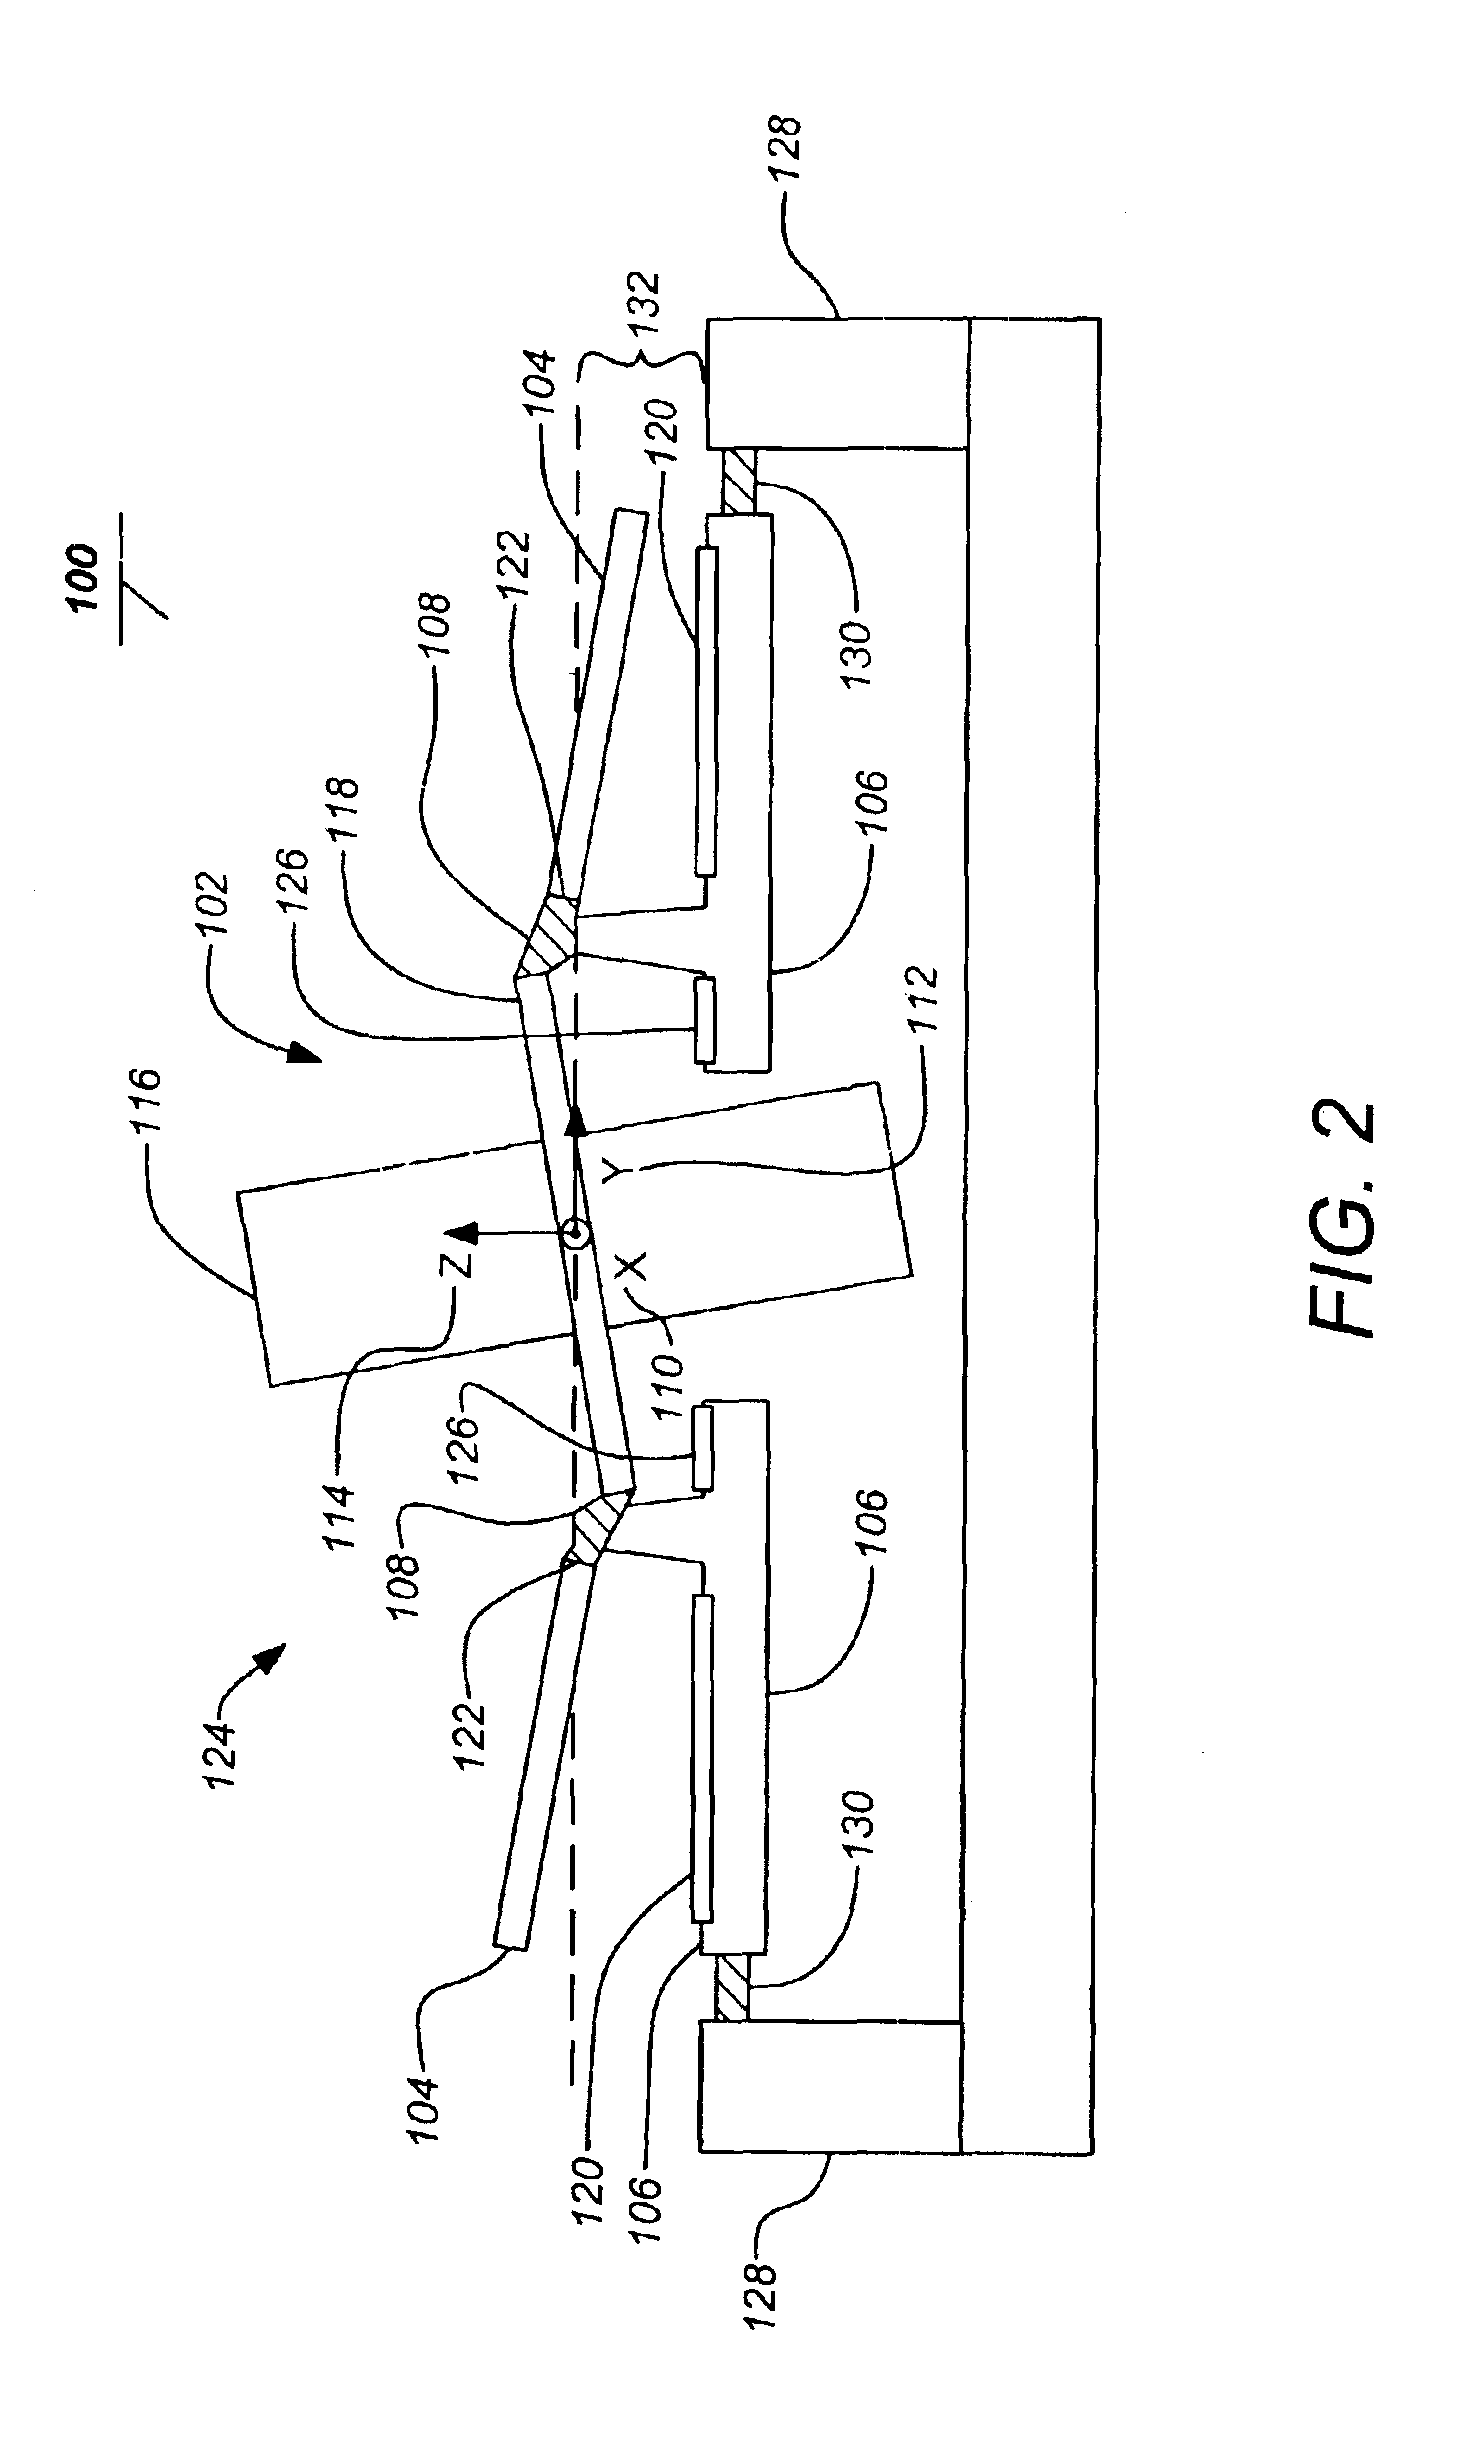 Isolated resonator gyroscope with isolation trimming using a secondary element